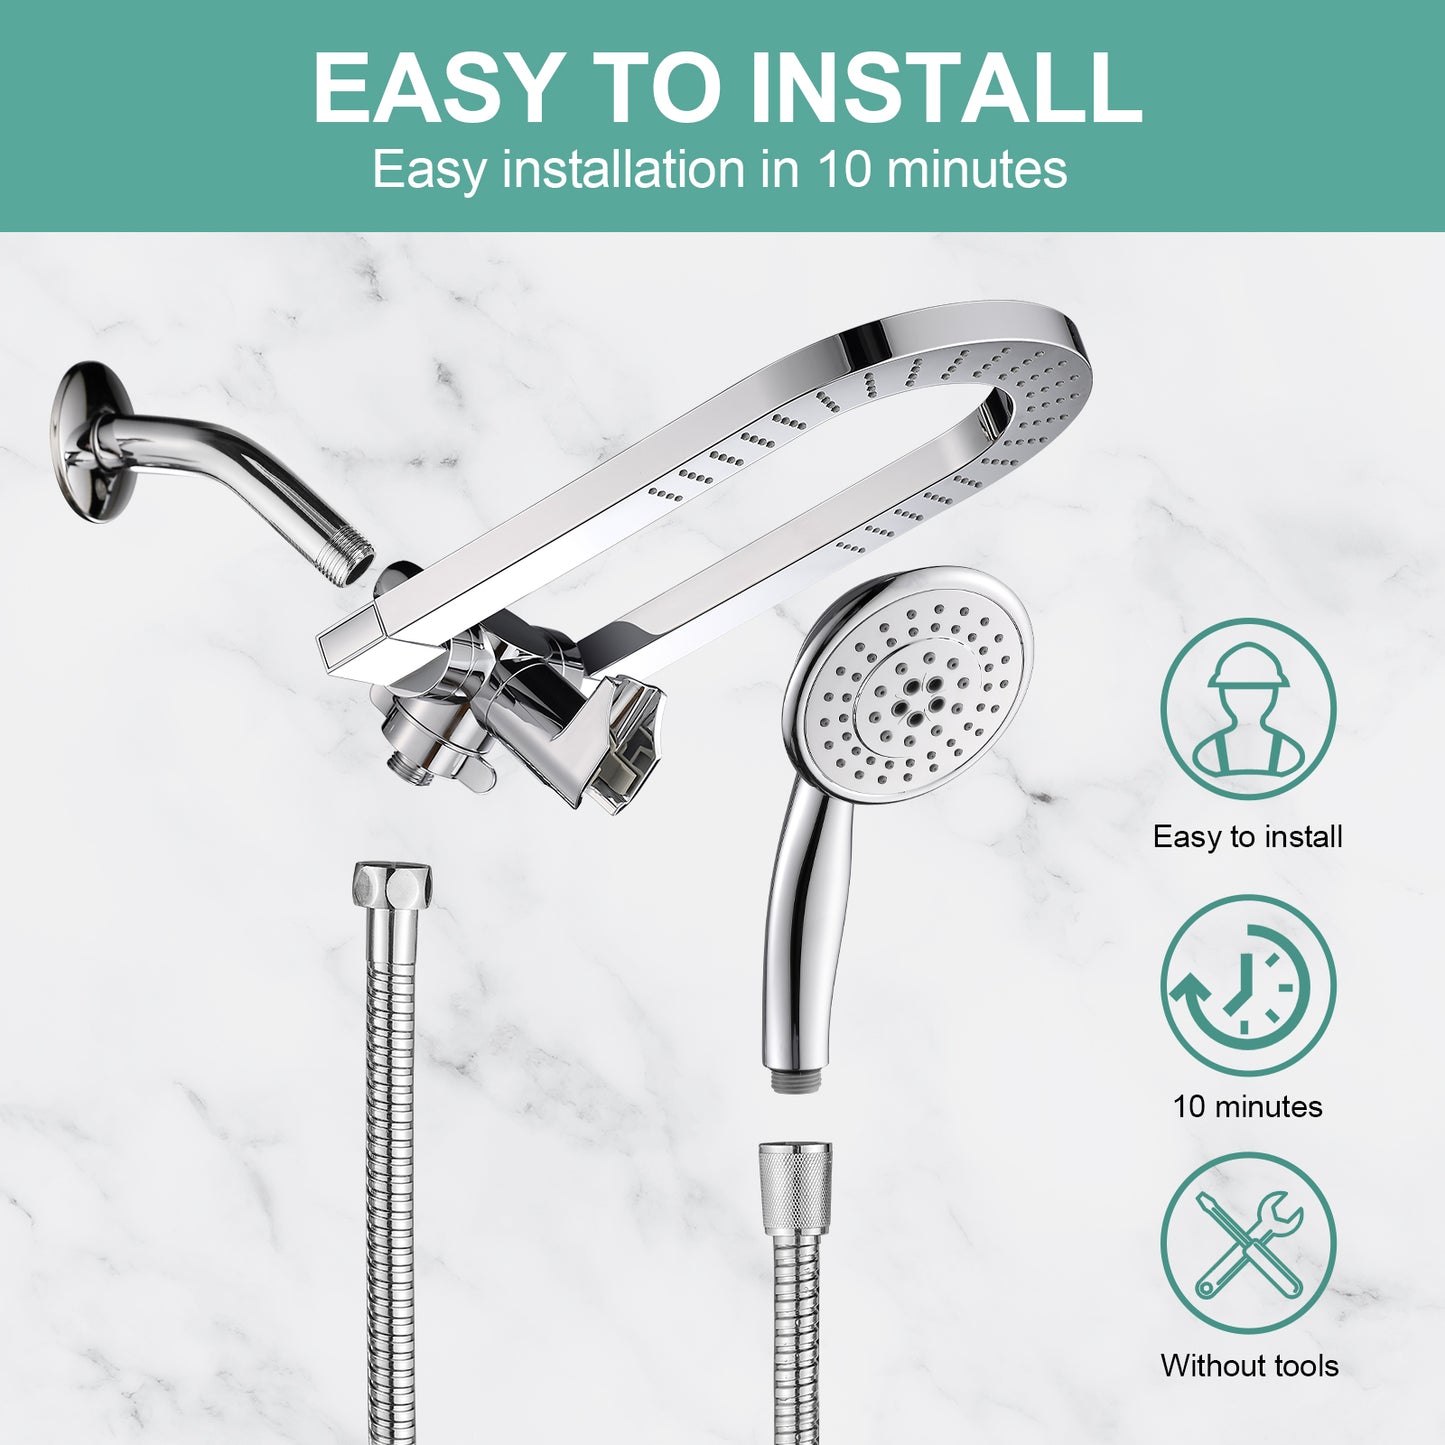 Cobbe Premium 3-Way Rain Shower Head Combo, Dual Shower Head with Handheld, 5-mode High Pressure Rainfall Showerhead with Stainless Steel Hose & Sealant Tape - U.S. Invention Patents